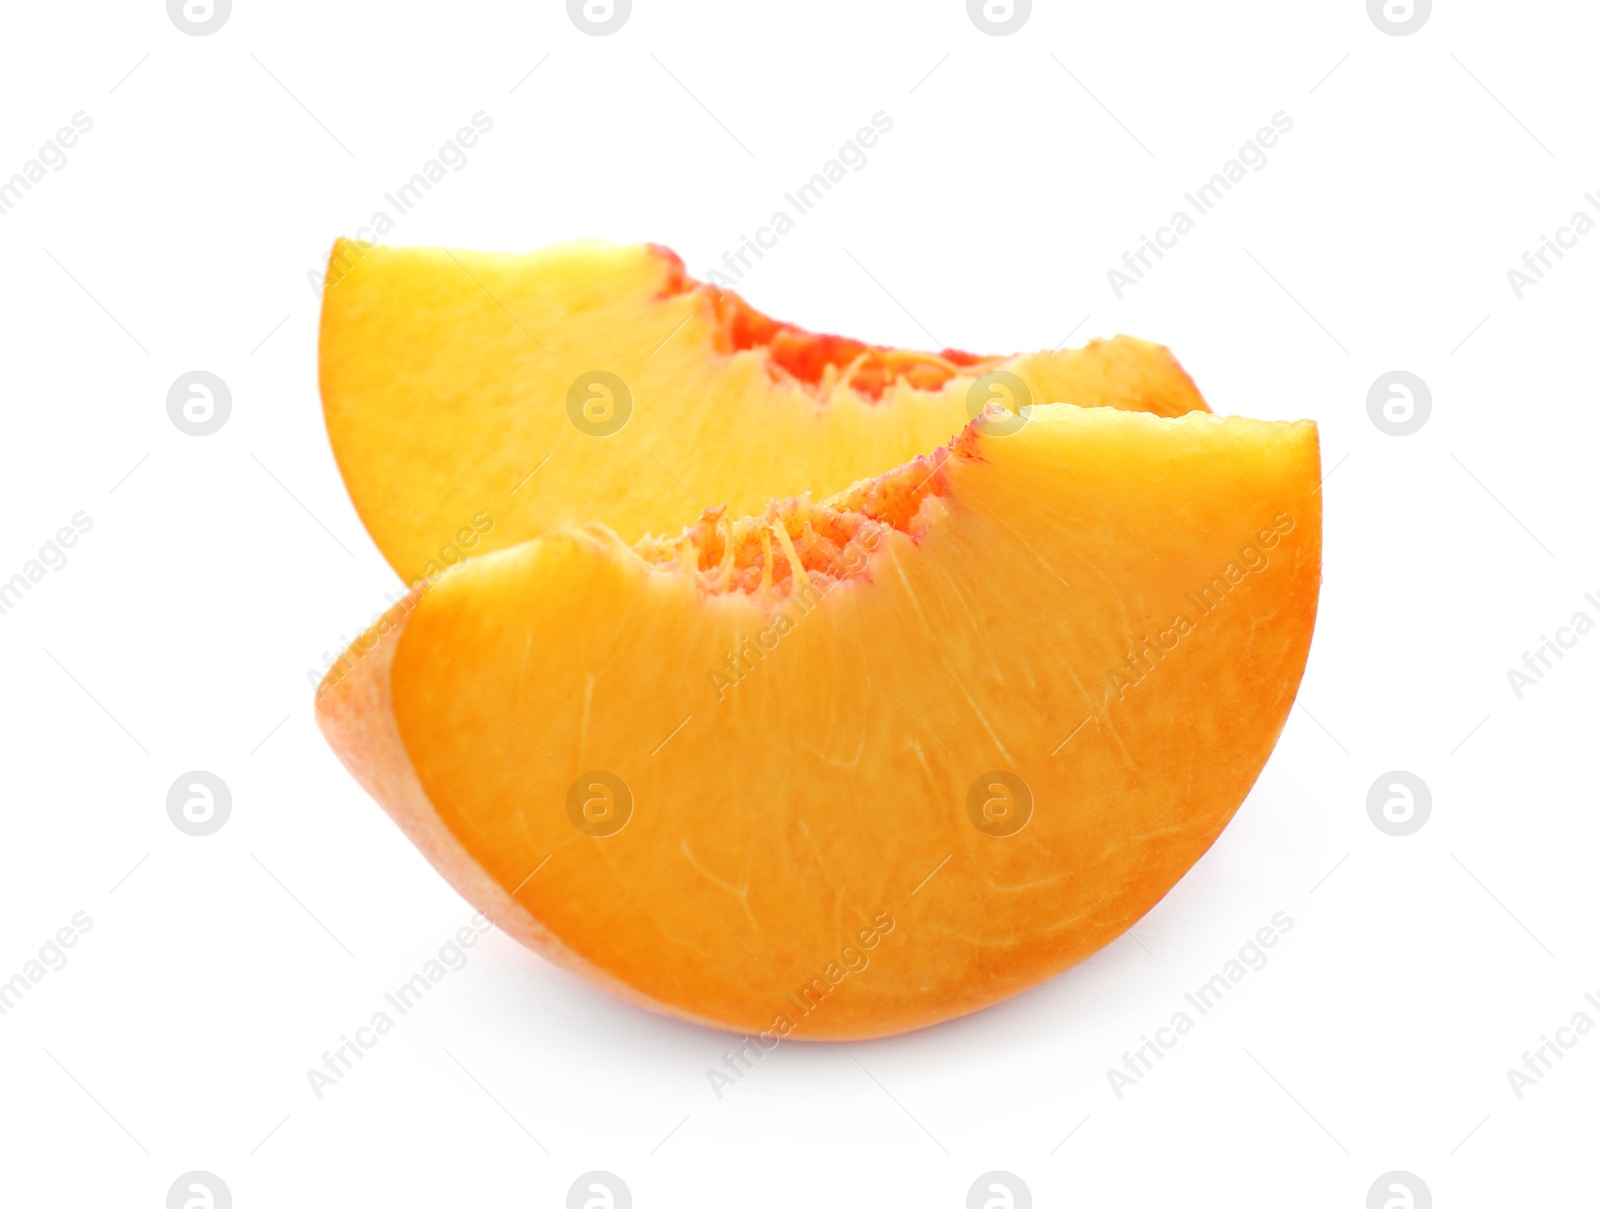 Photo of Slices of ripe peach on white background